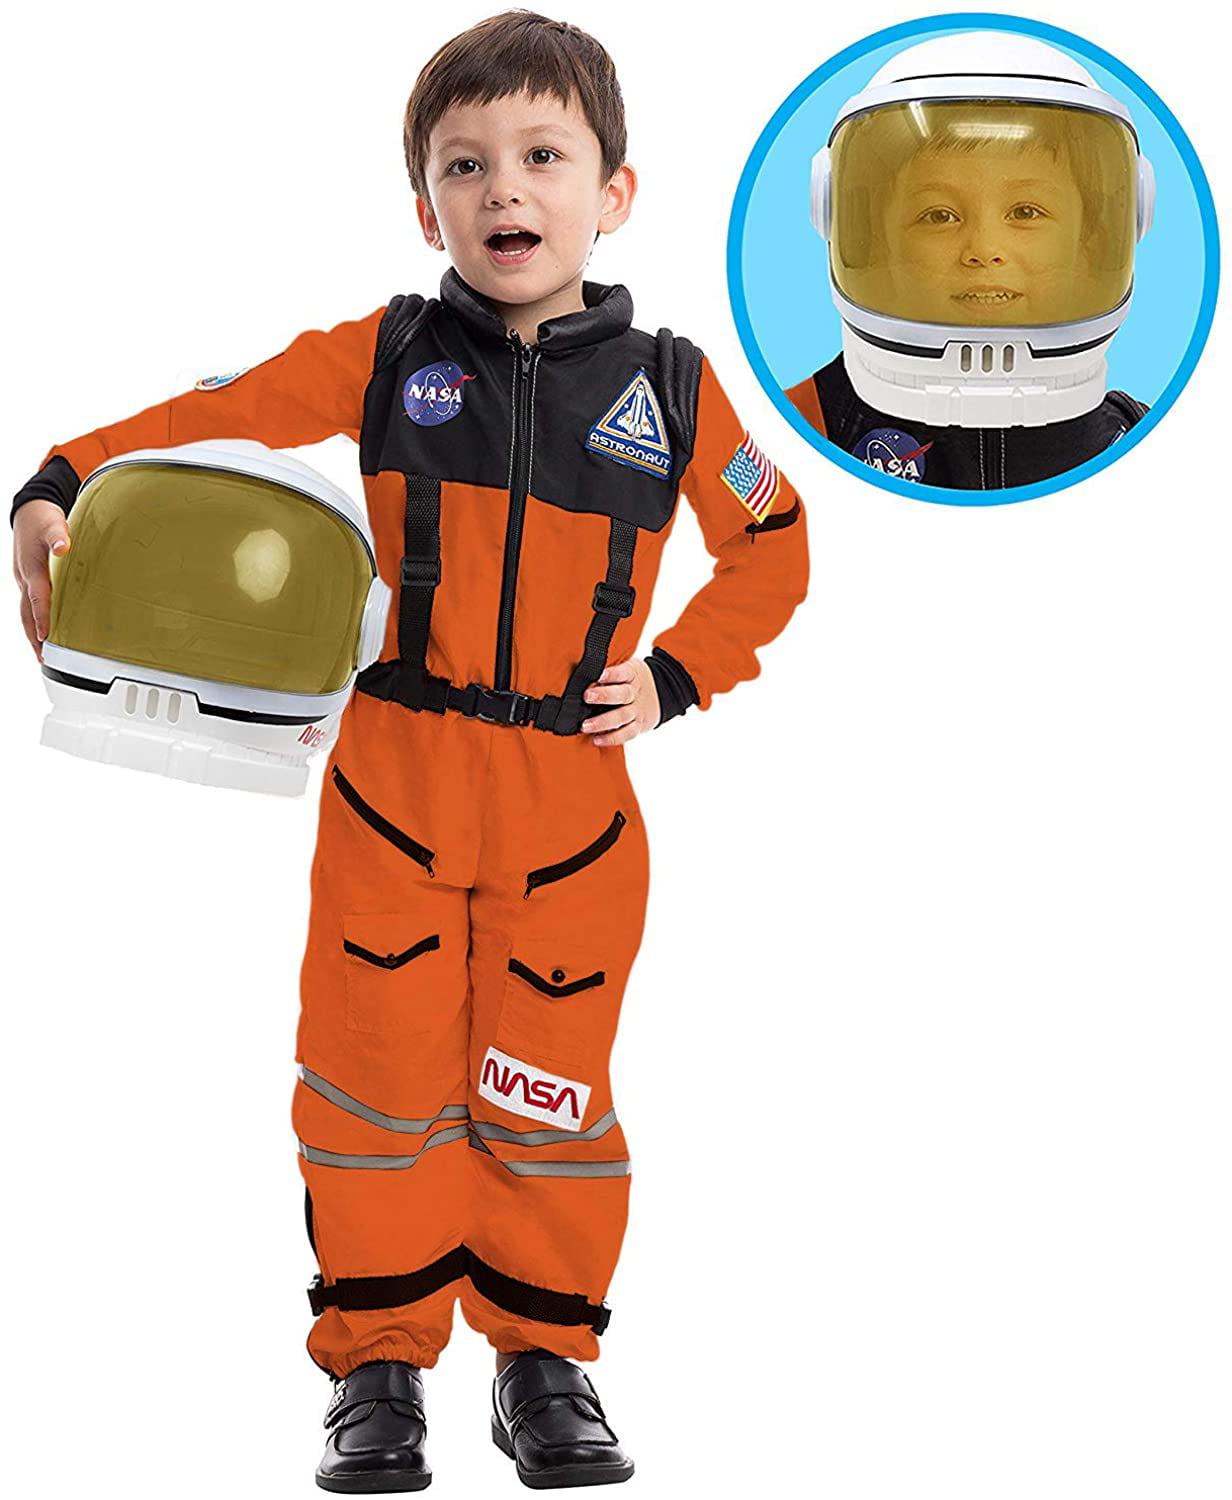 Astronaut Costume for Kids NASA Orange/White Space Suit By Dress Up America 